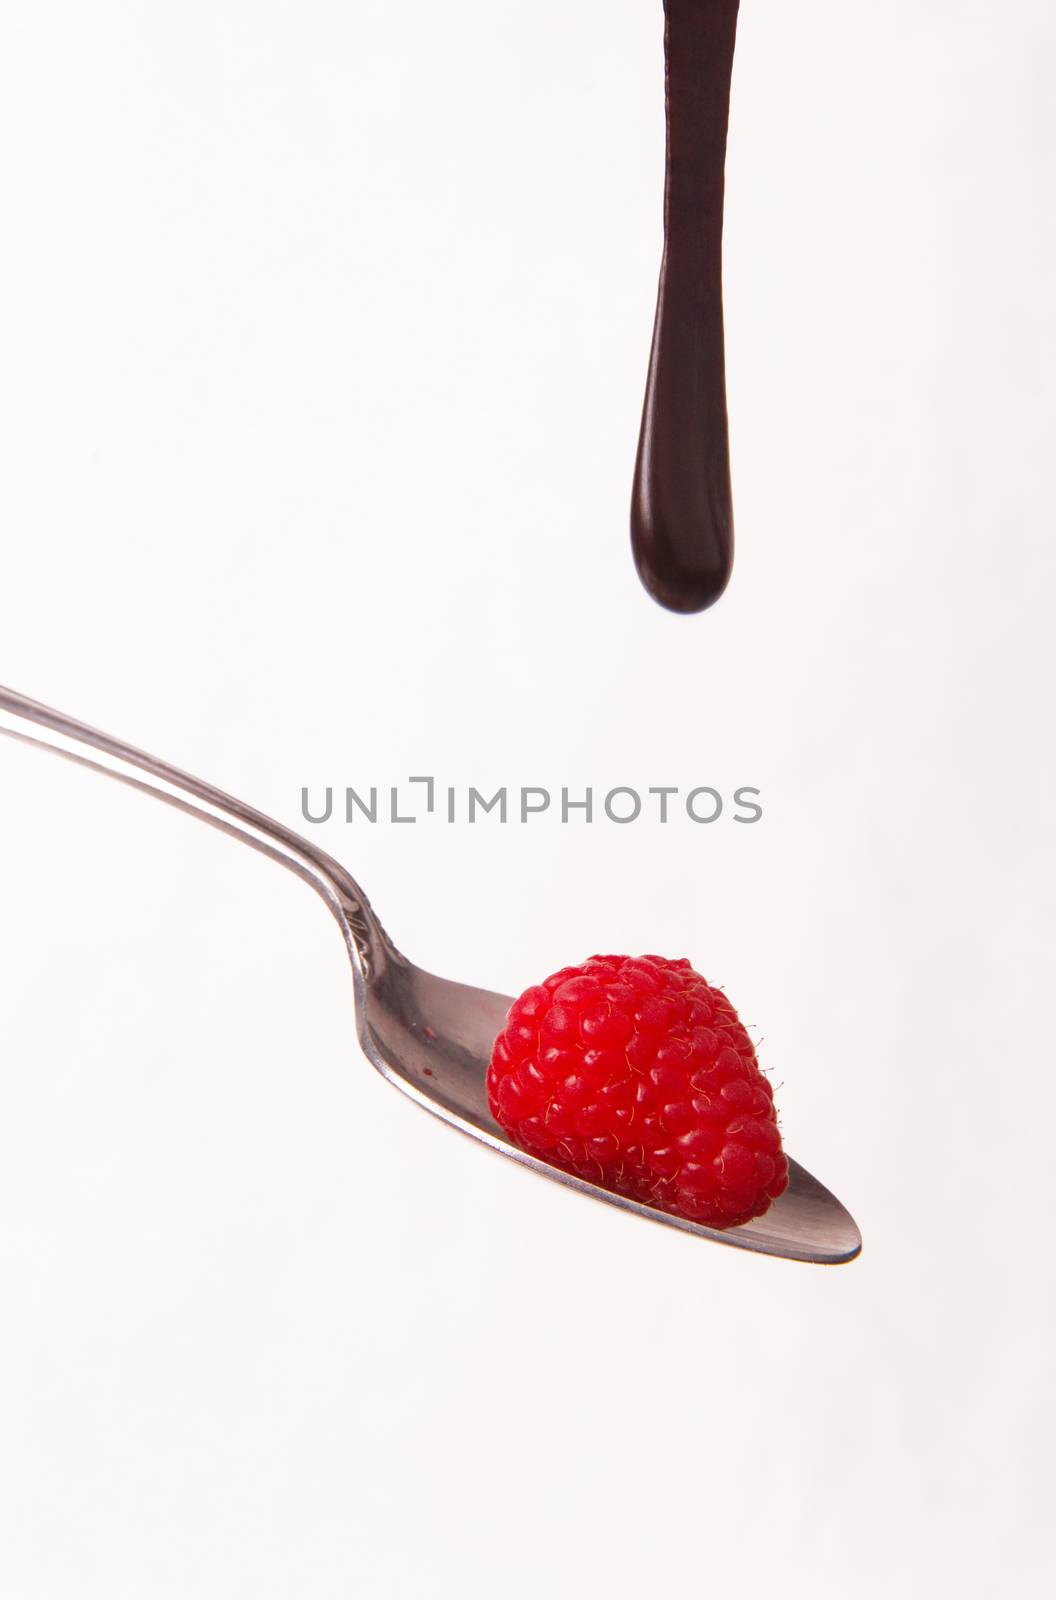 Chocolate Sauce Falling Berries Rasberries on Silver Spoon by ChrisBoswell